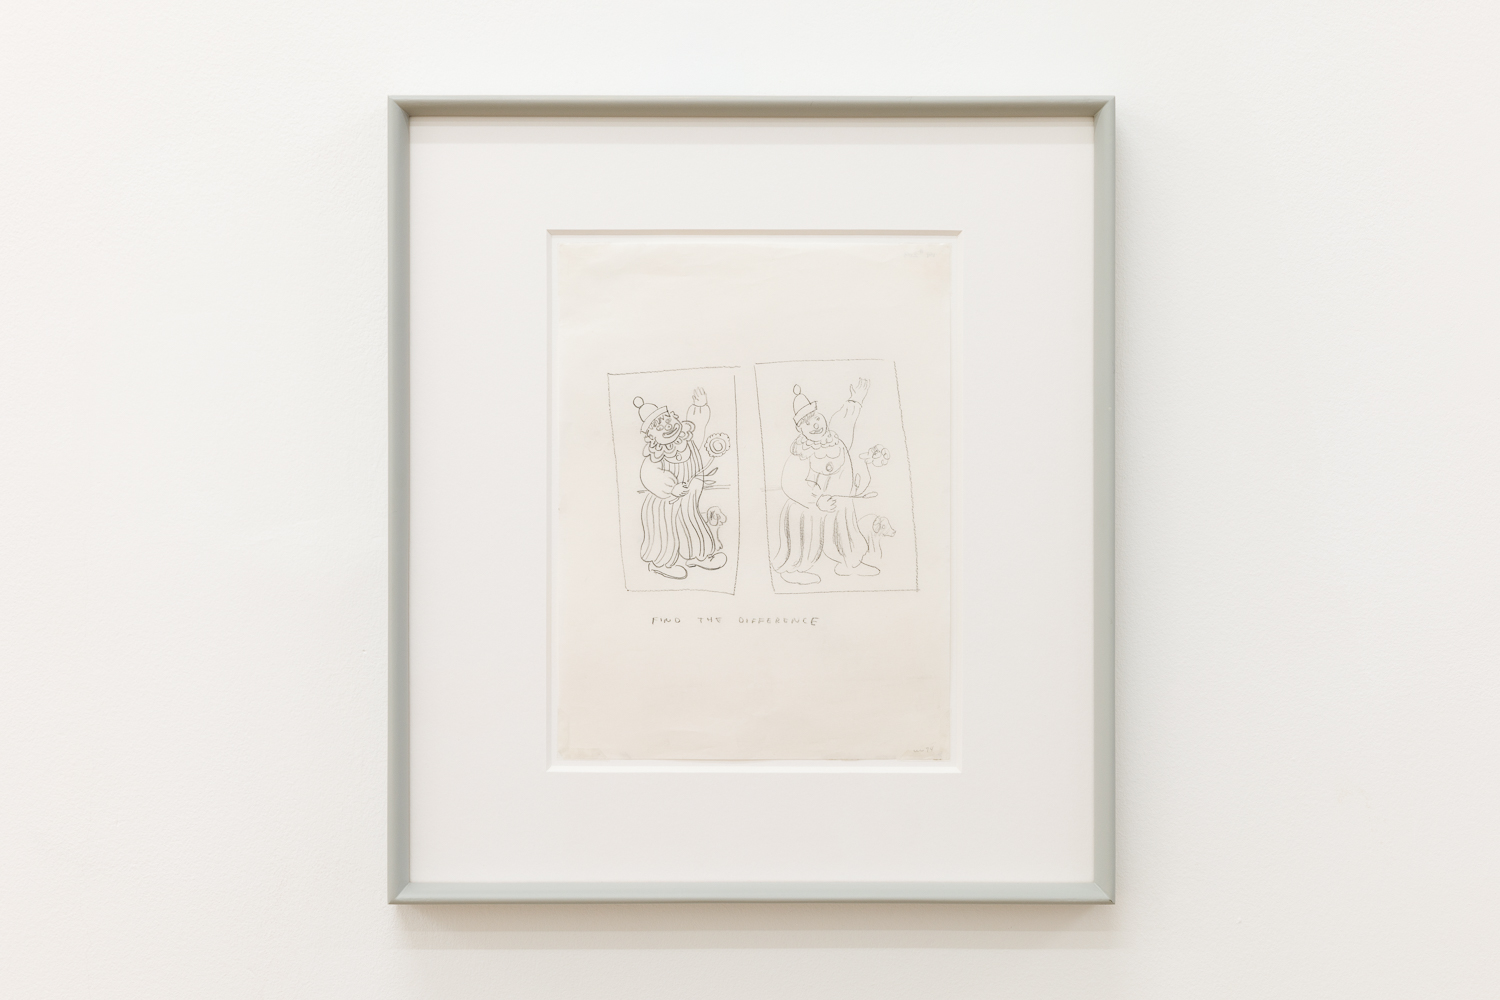 Find the Difference, William Wegman, Drawing by Artist. Huxley-Parlour Gallery, 45 Maddox Street London, W1S 2PE.